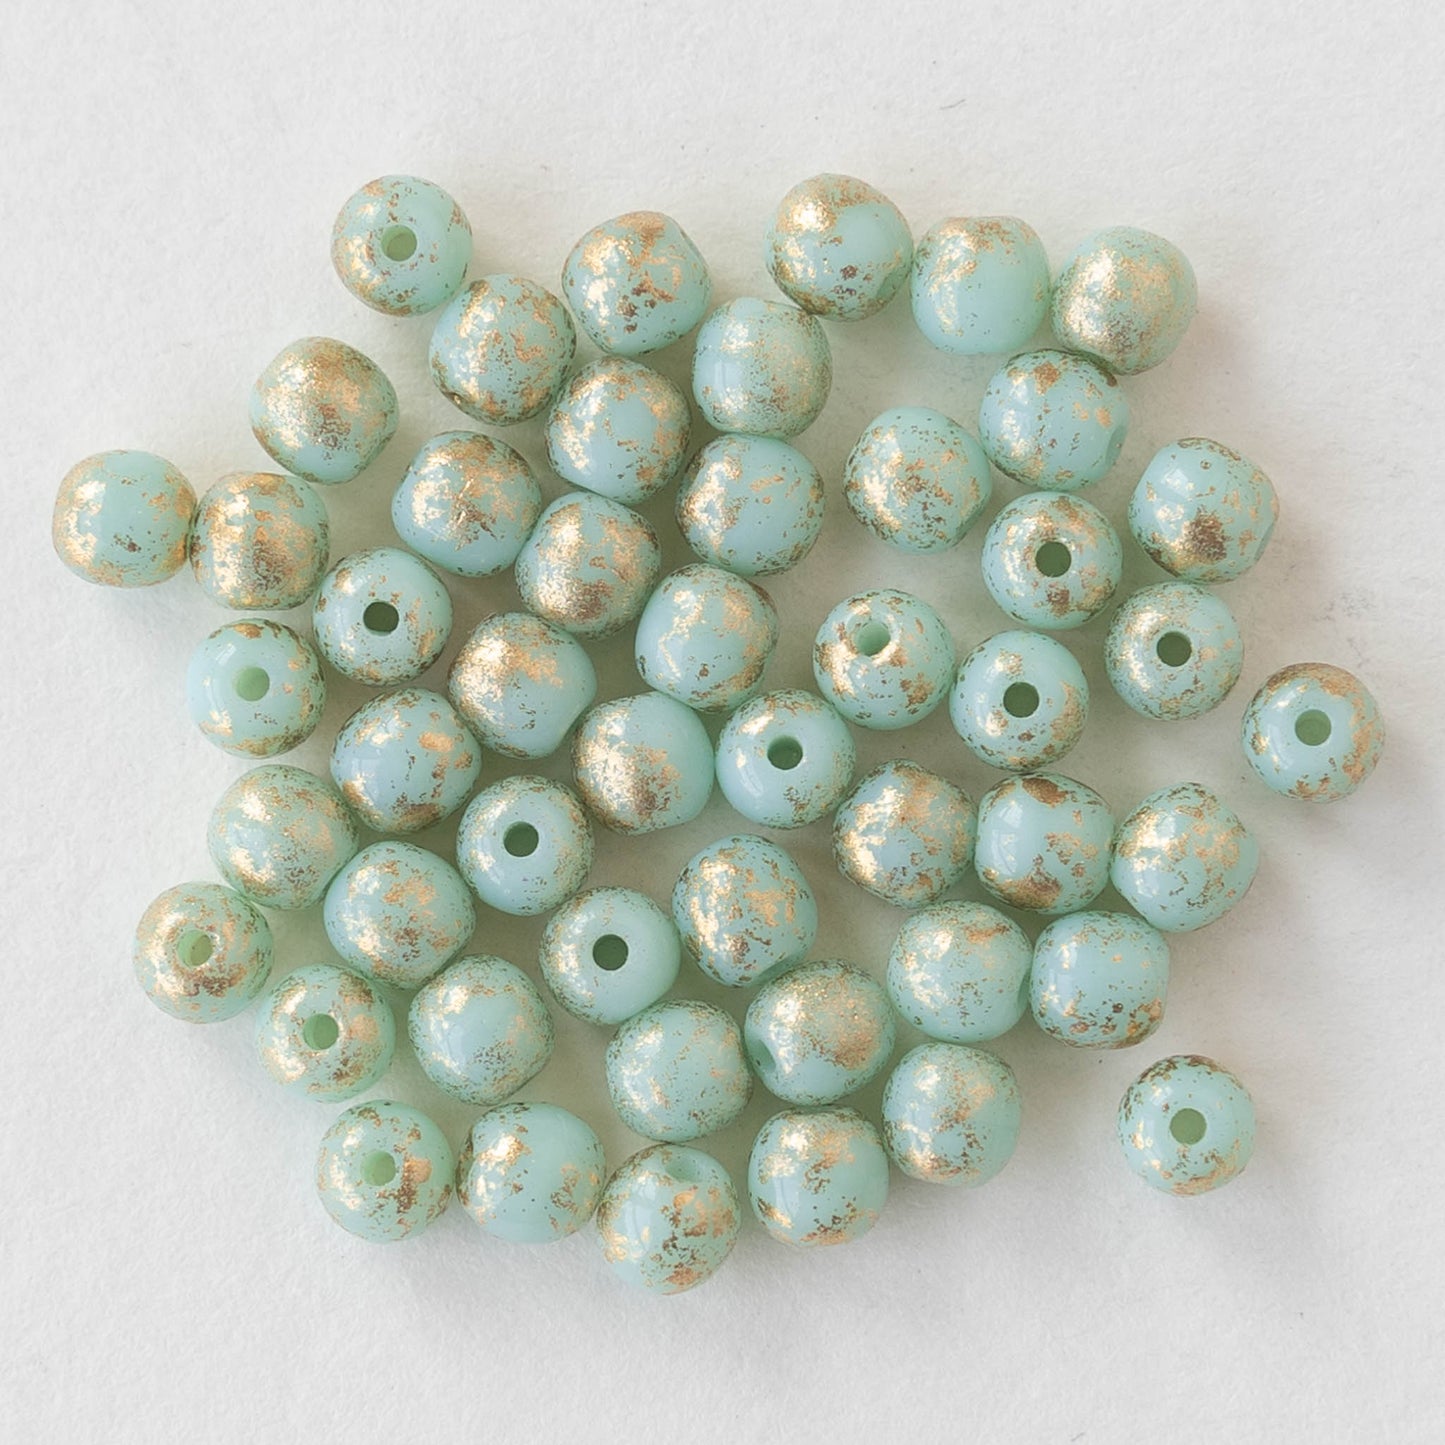 4mm Round Glass Beads - Mint Green with Gold - 50 Beads